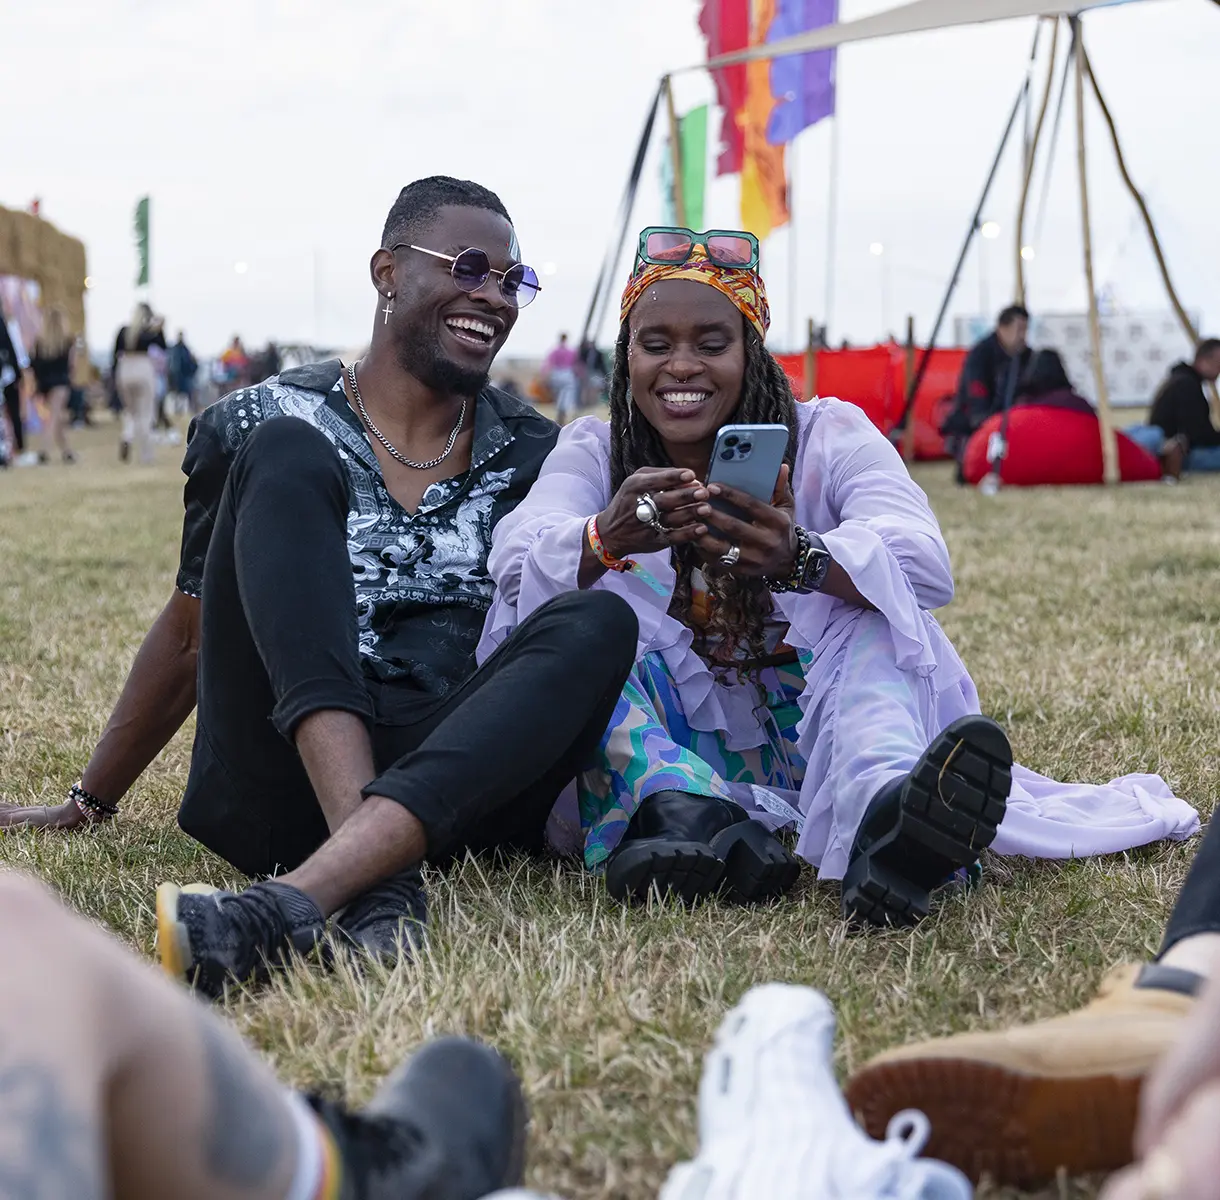 Two friends sitting together on the ground at a festival